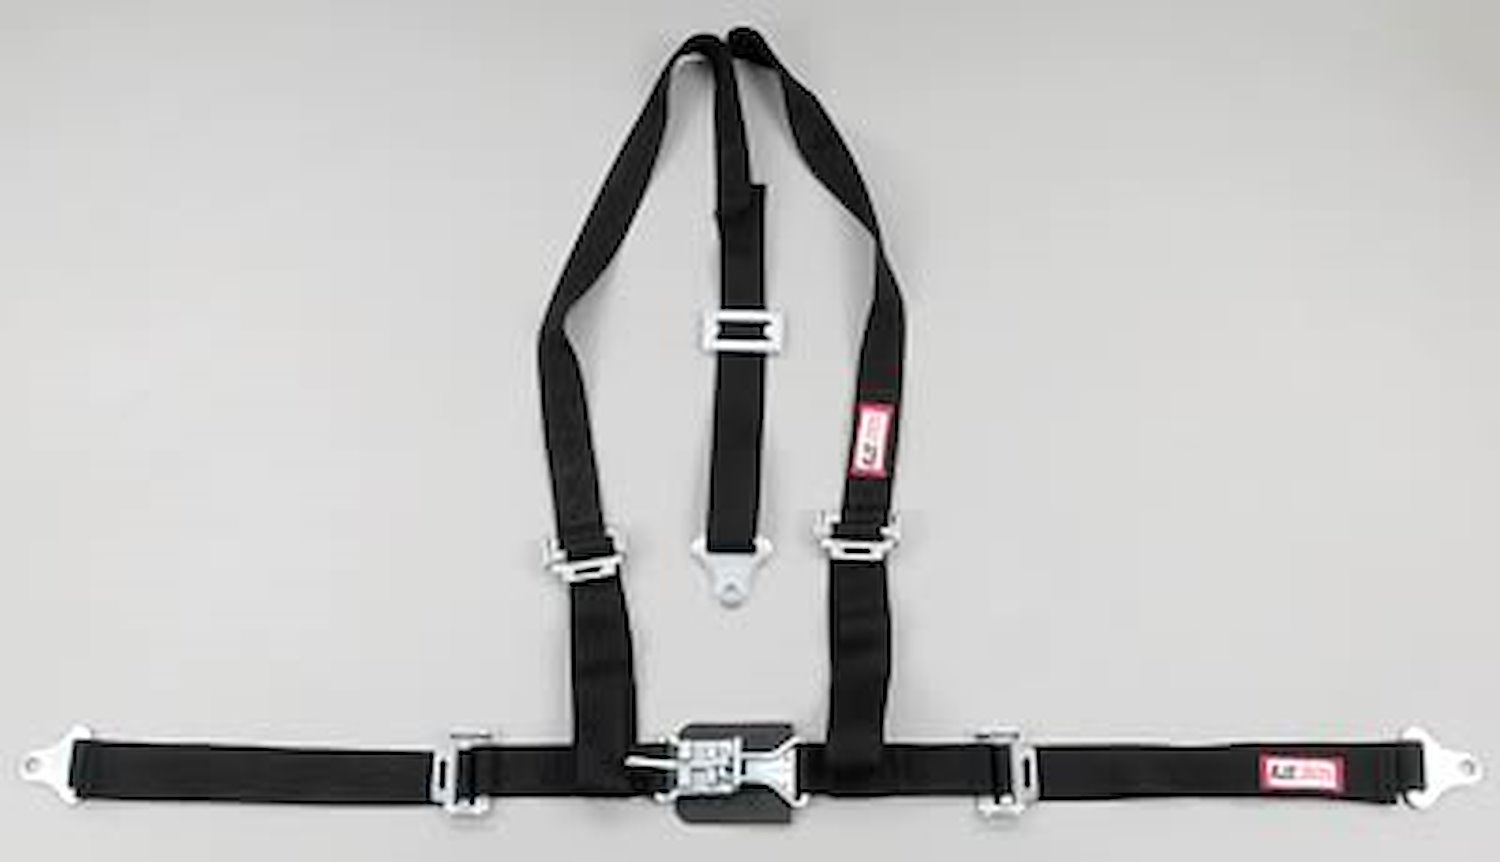 NON-SFI L&L HARNESS 3 PULL DOWN Lap Belt SNAP SEWN IN 2 S.H. Individual FLOOR Mount WRAP/BOLT GRAY